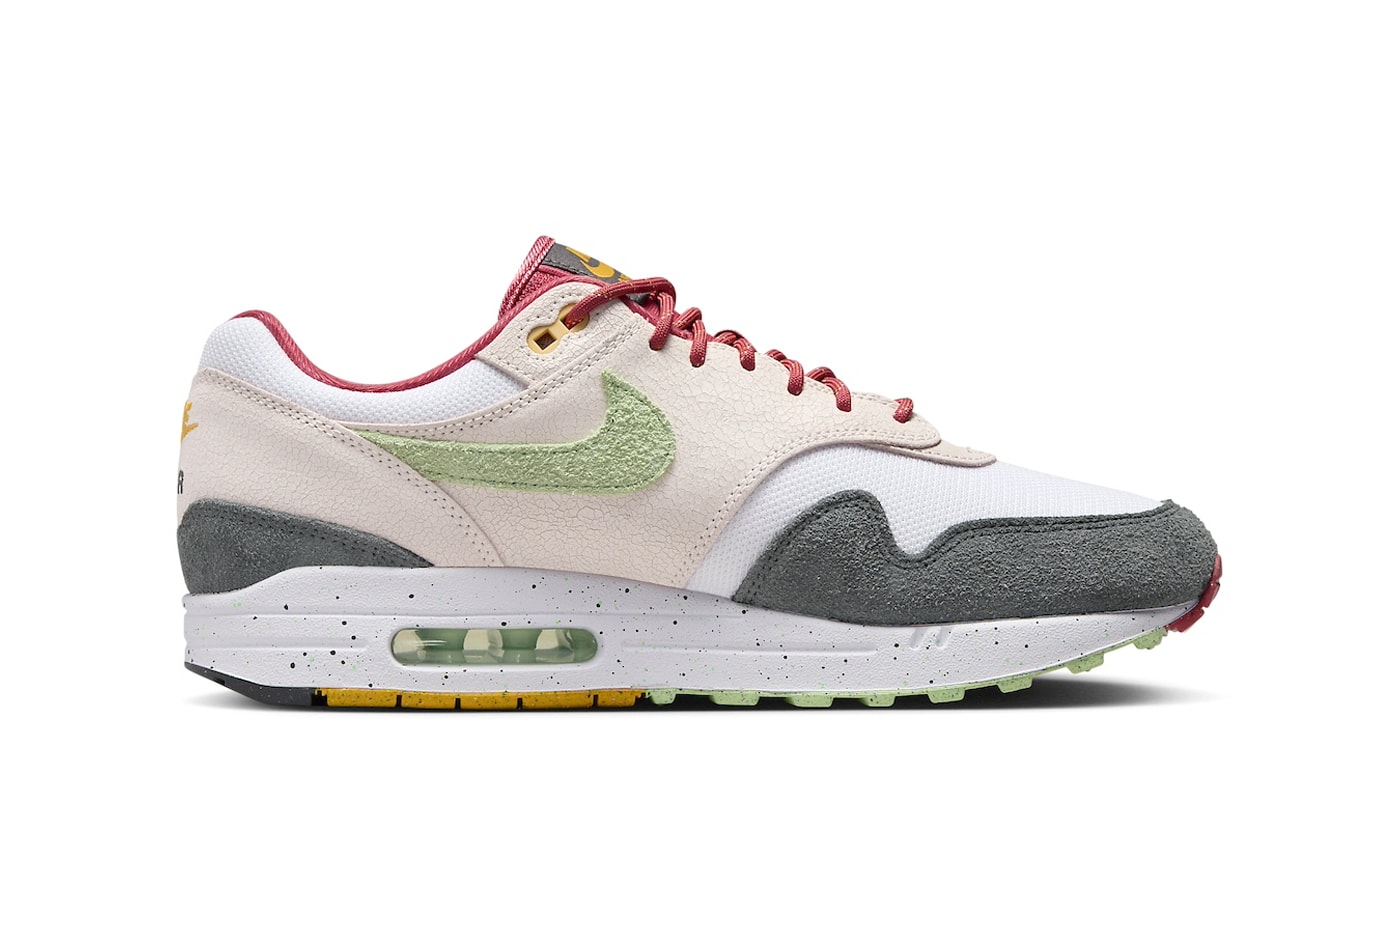 Nike Air Max 1 Surfaces in Mixed Pastels FZ4133-640 Light Soft Pink/Vapor Green-Anthracite swoosh